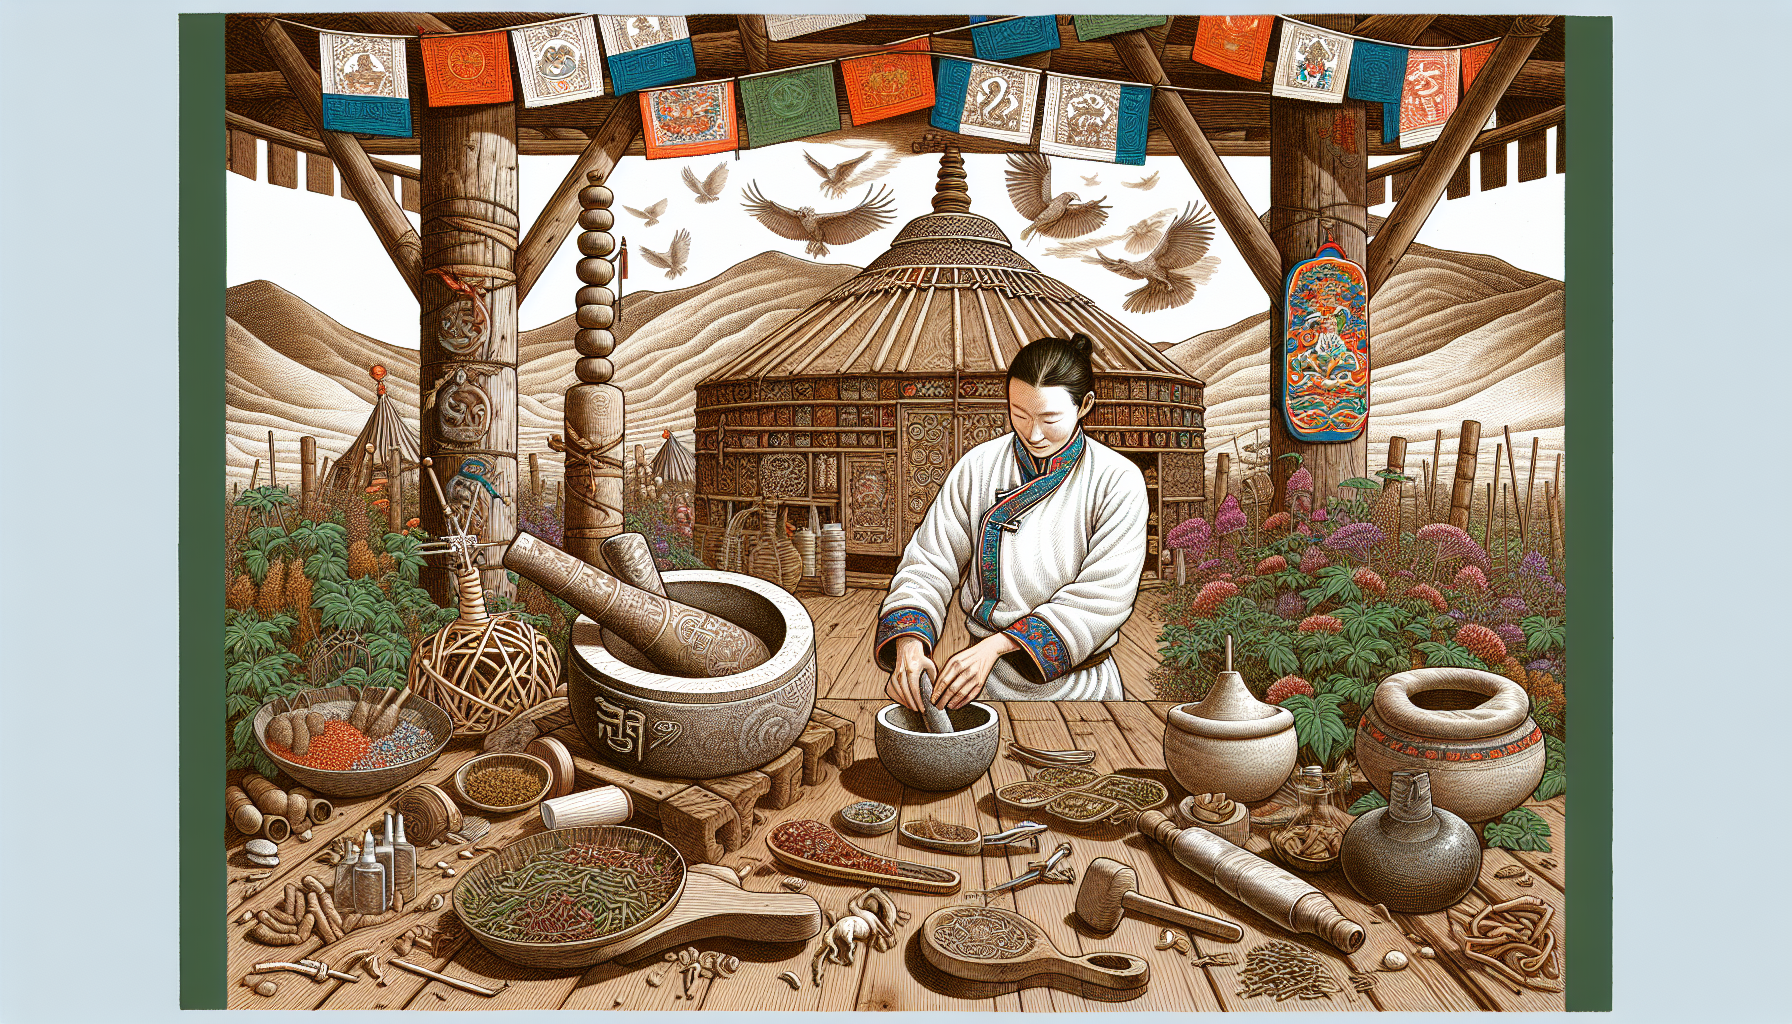 Traditional Mongolian medicine and healthcare practices